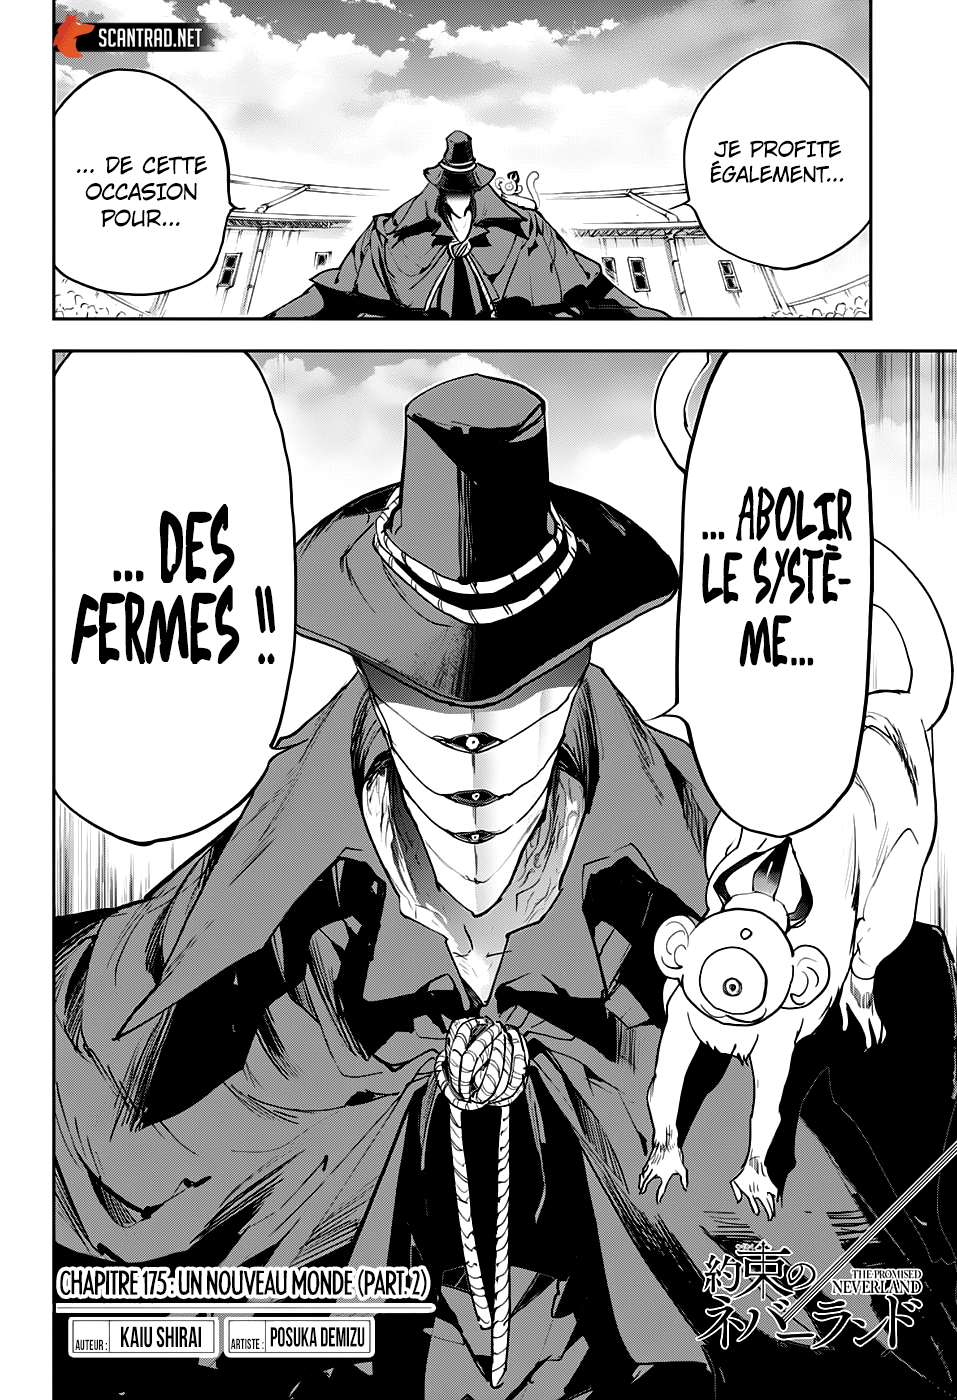 The Promised Neverland: Chapter chapitre-175 - Page 2